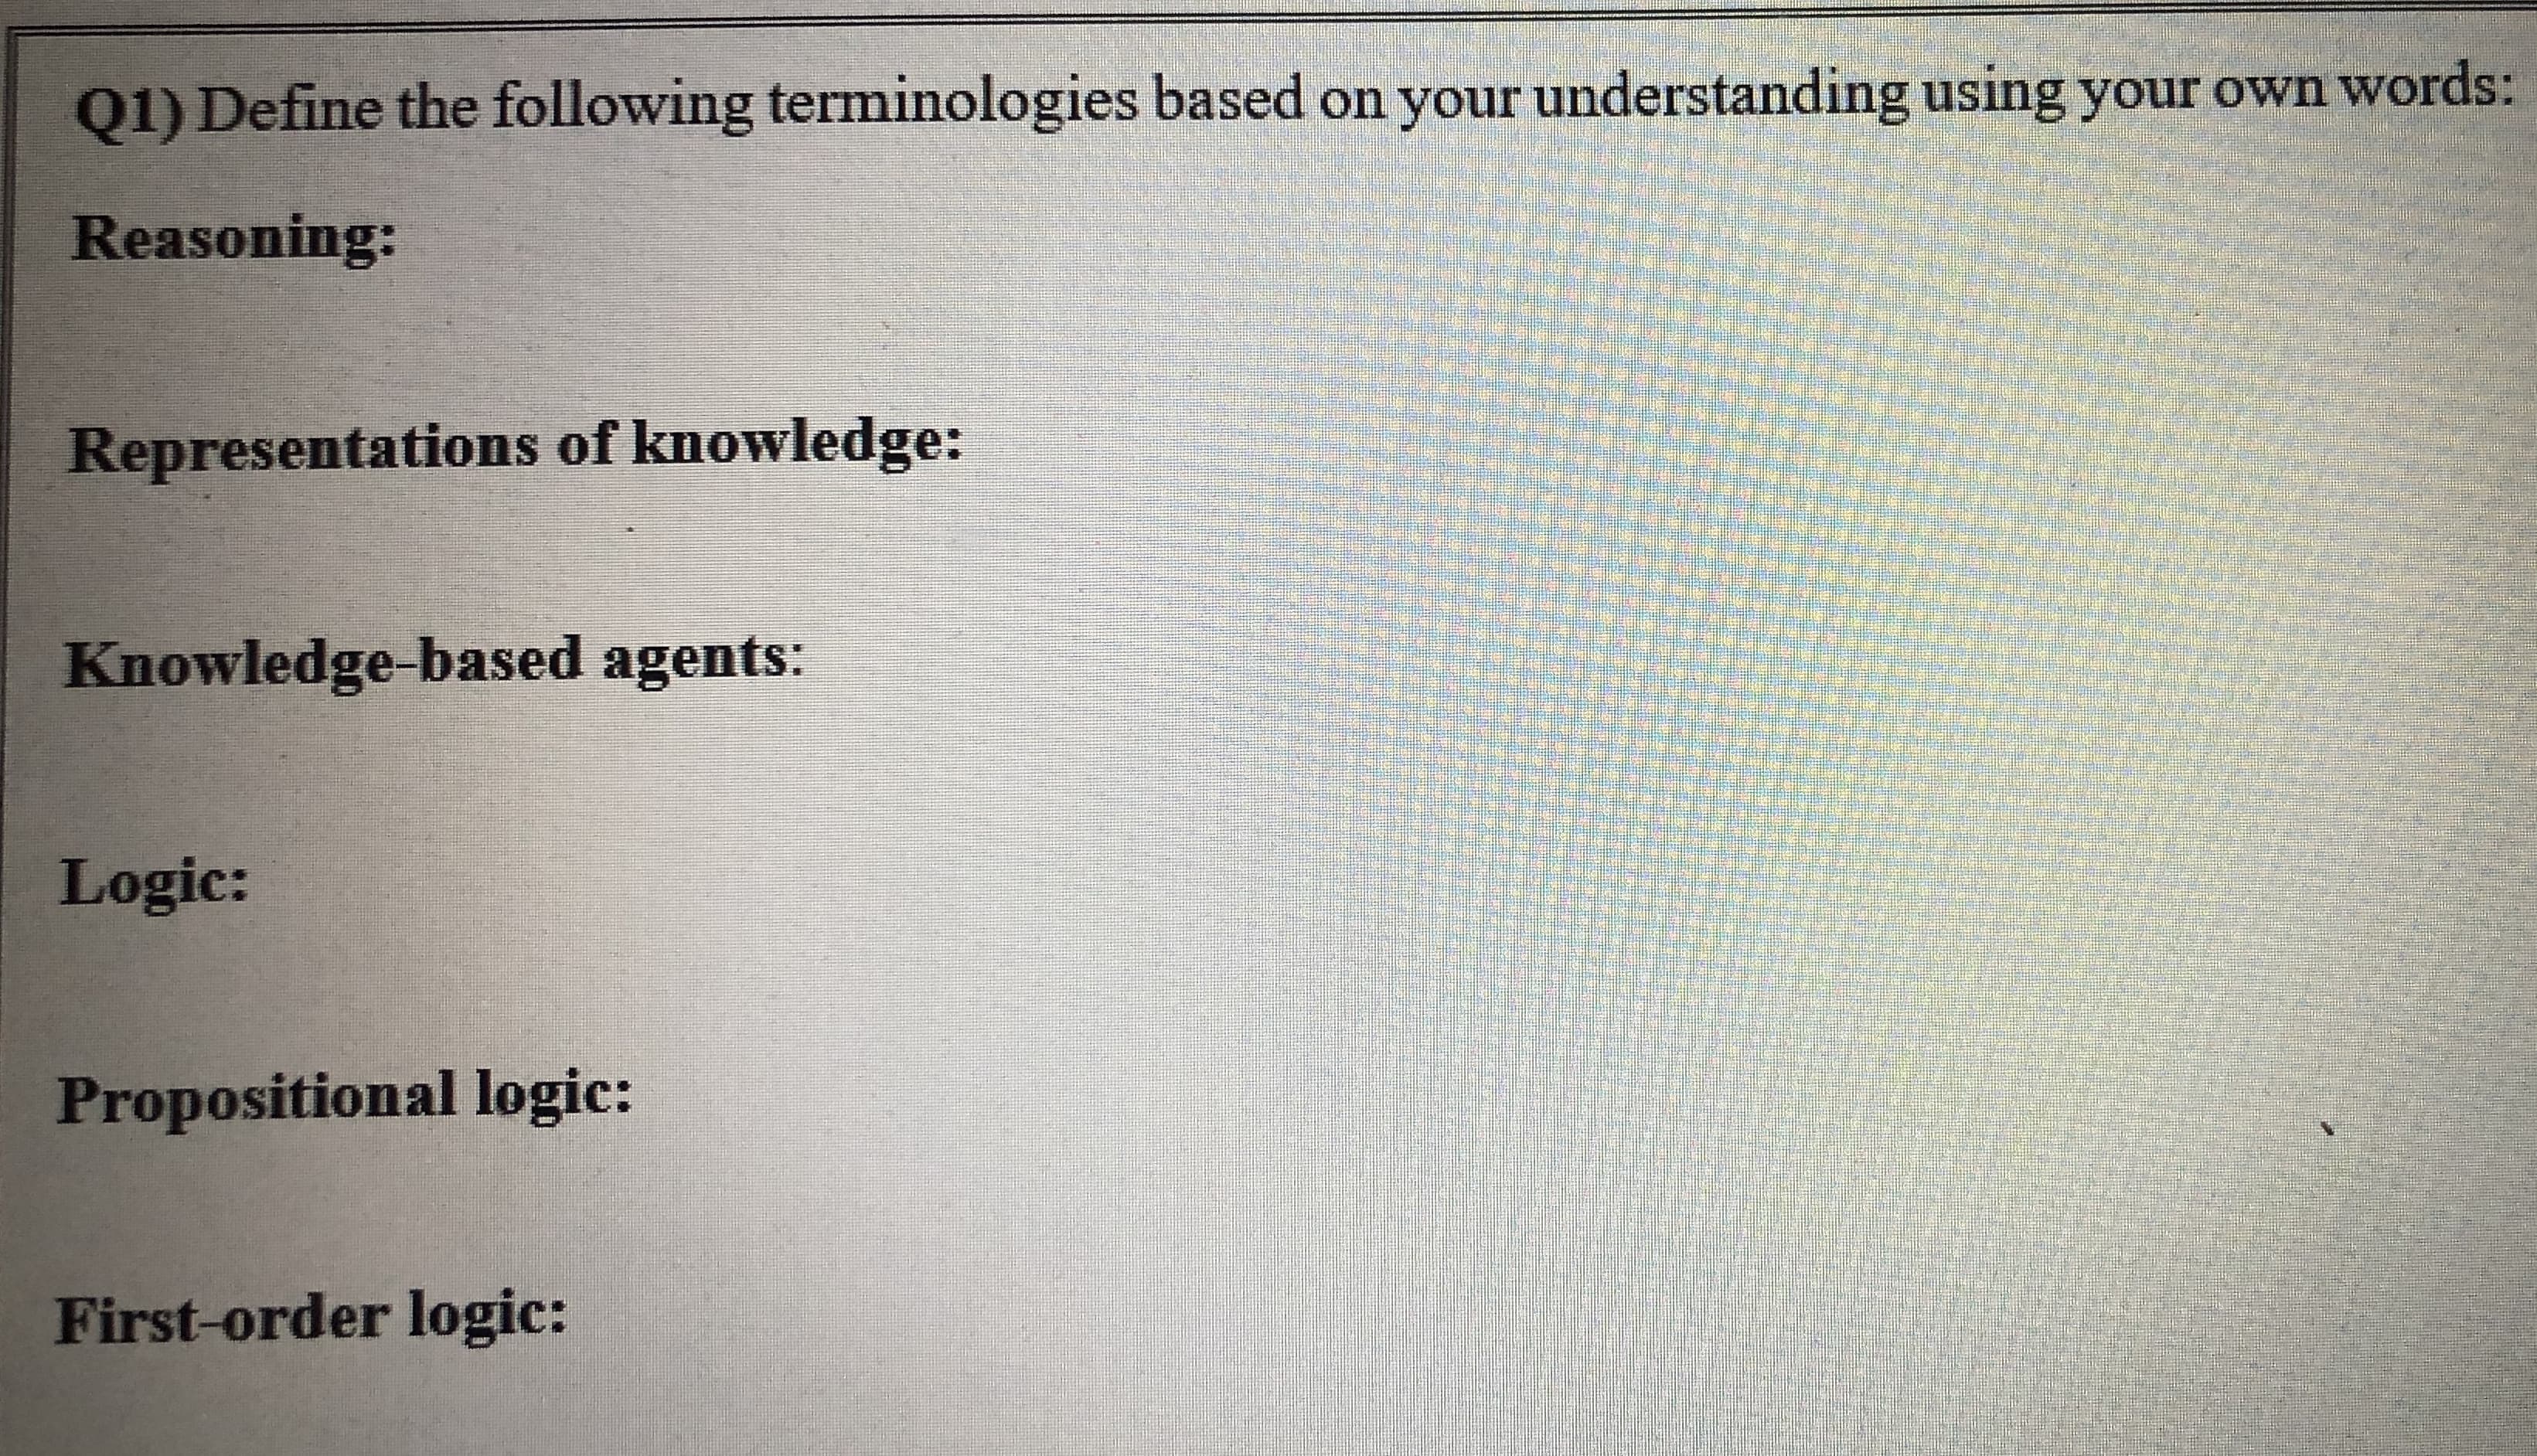 Q1) Define the following terminologies based on your understanding using your own words:
Reasoning:
Representations of knowledge:
Knowledge-based agents:
Logic:
Propositional logic:
First-order logic:
